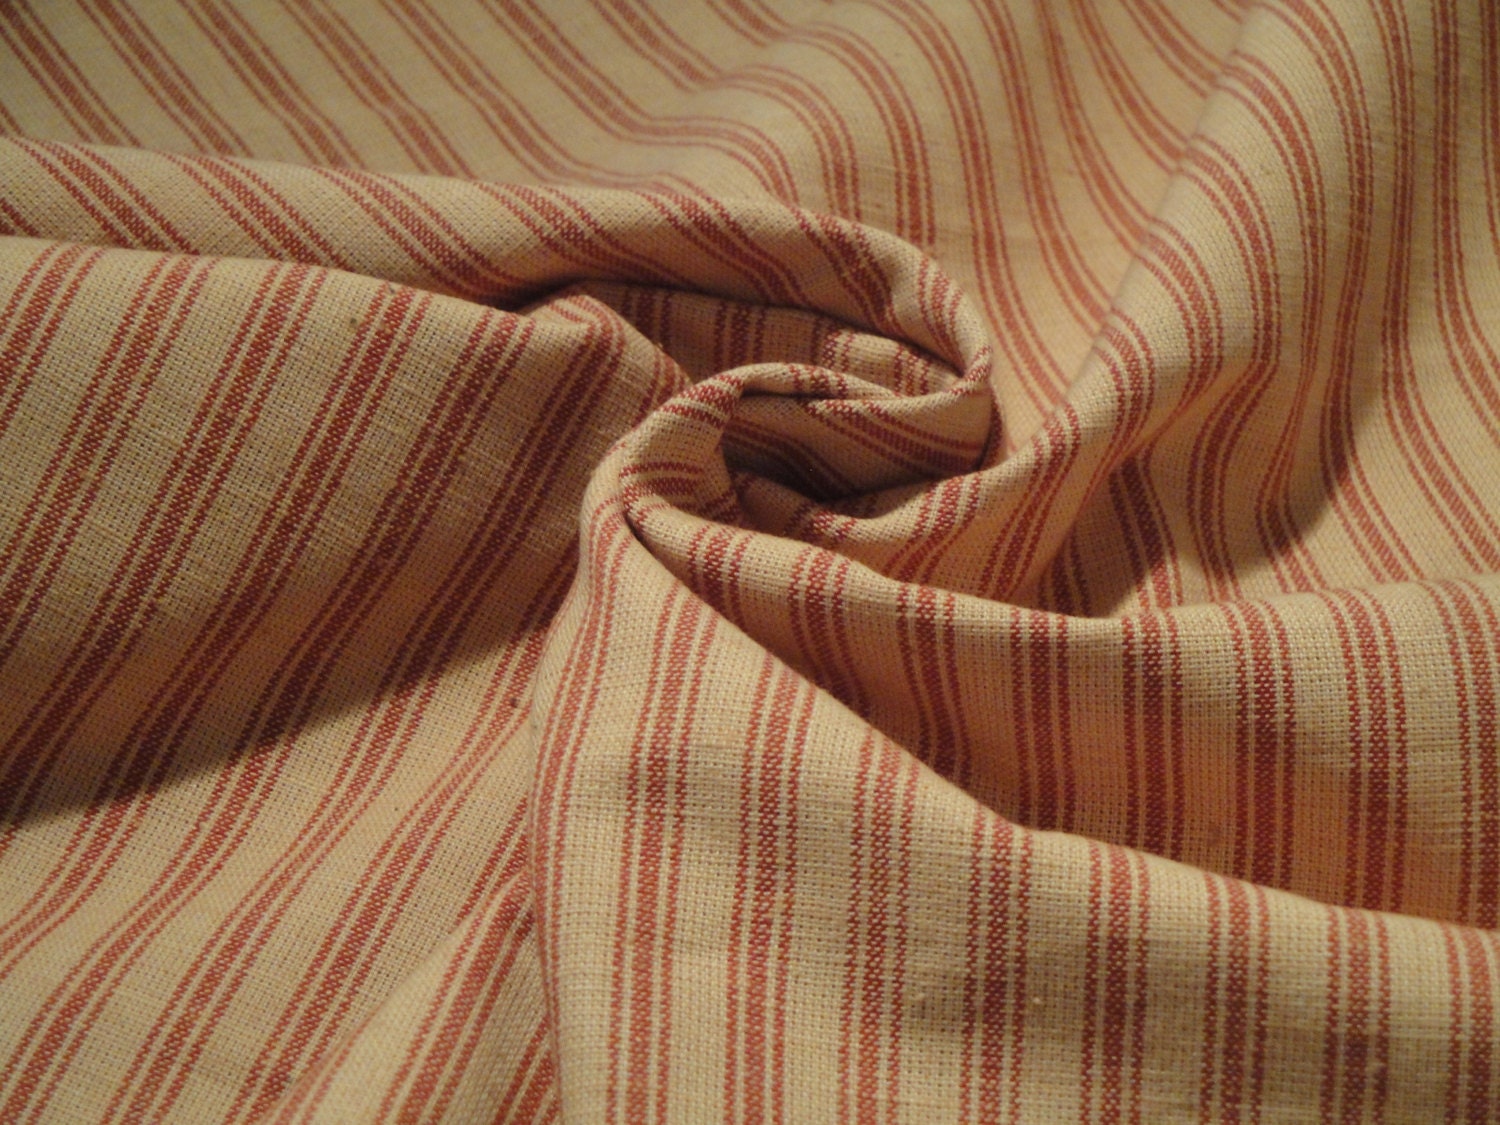 Red And Natural Tan Primitive Ticking Stripe Woven Cotton Homespun Sewing  Fabric